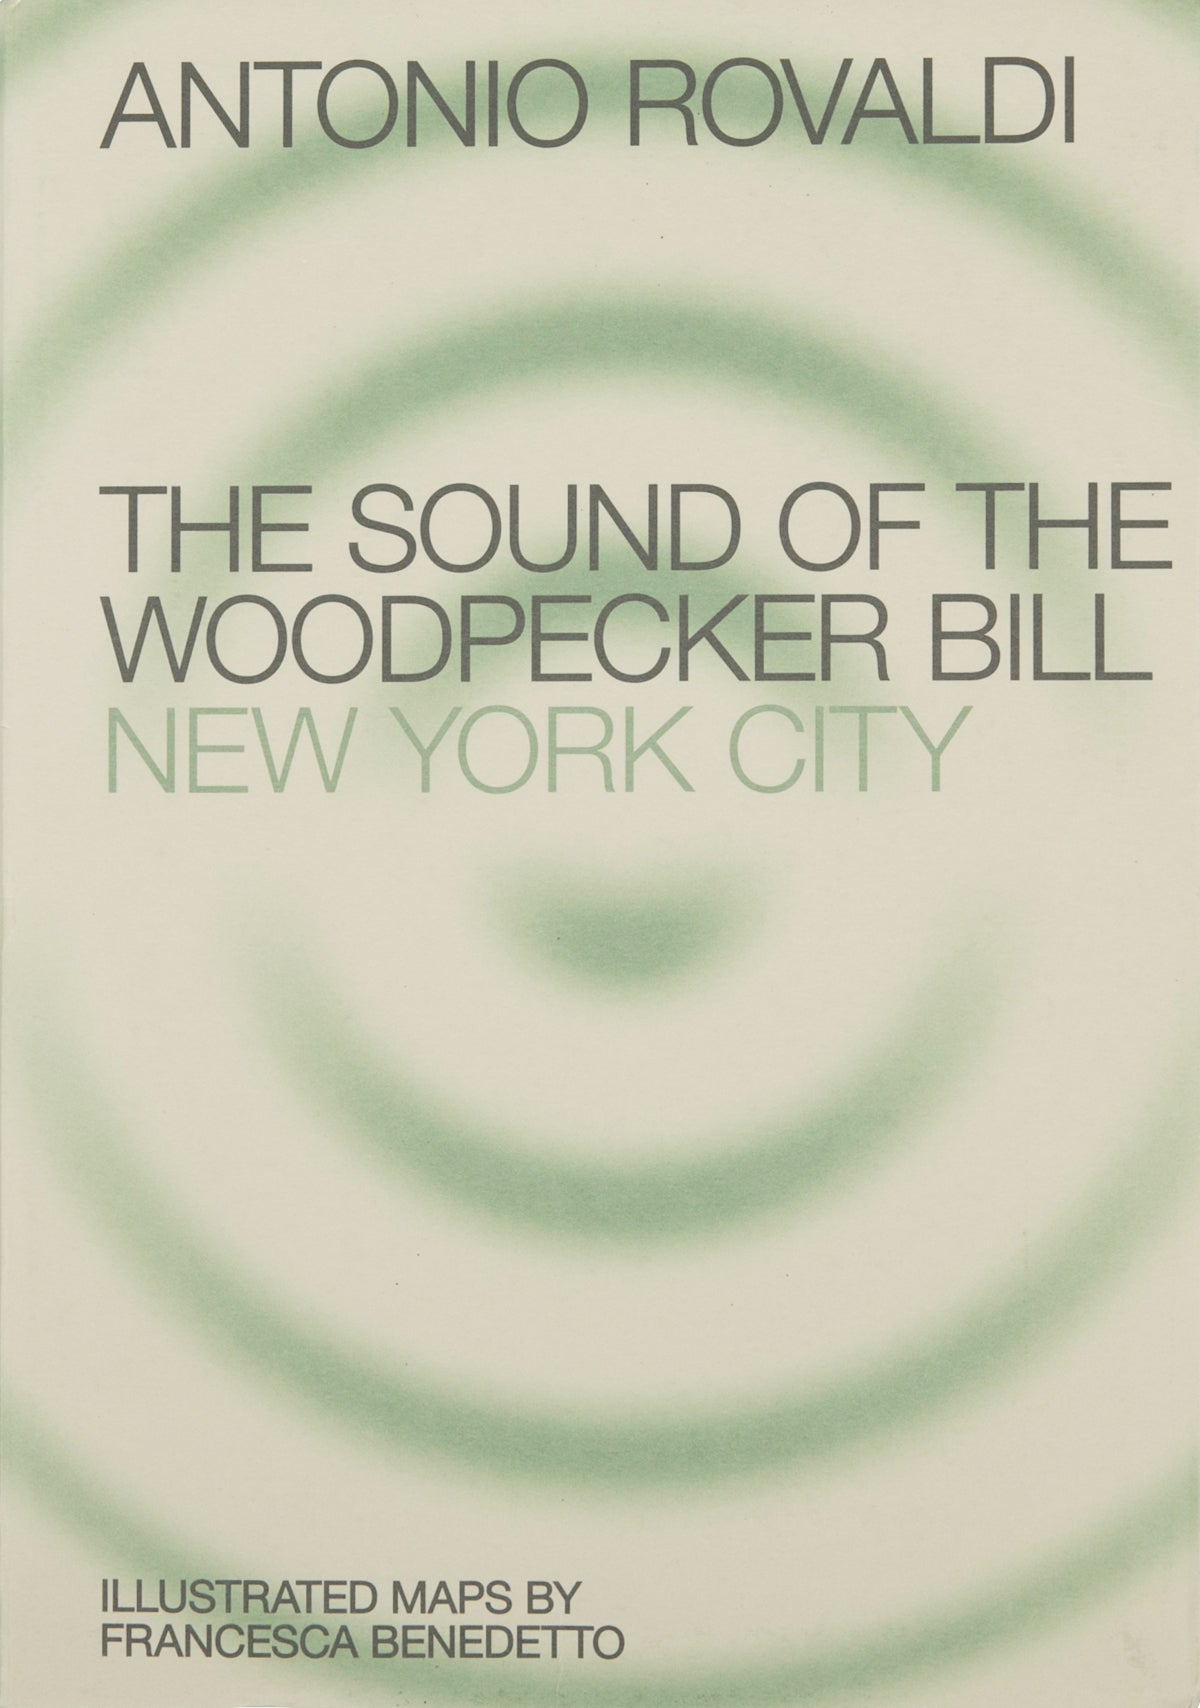 The Sound of the Woodpecker Bill